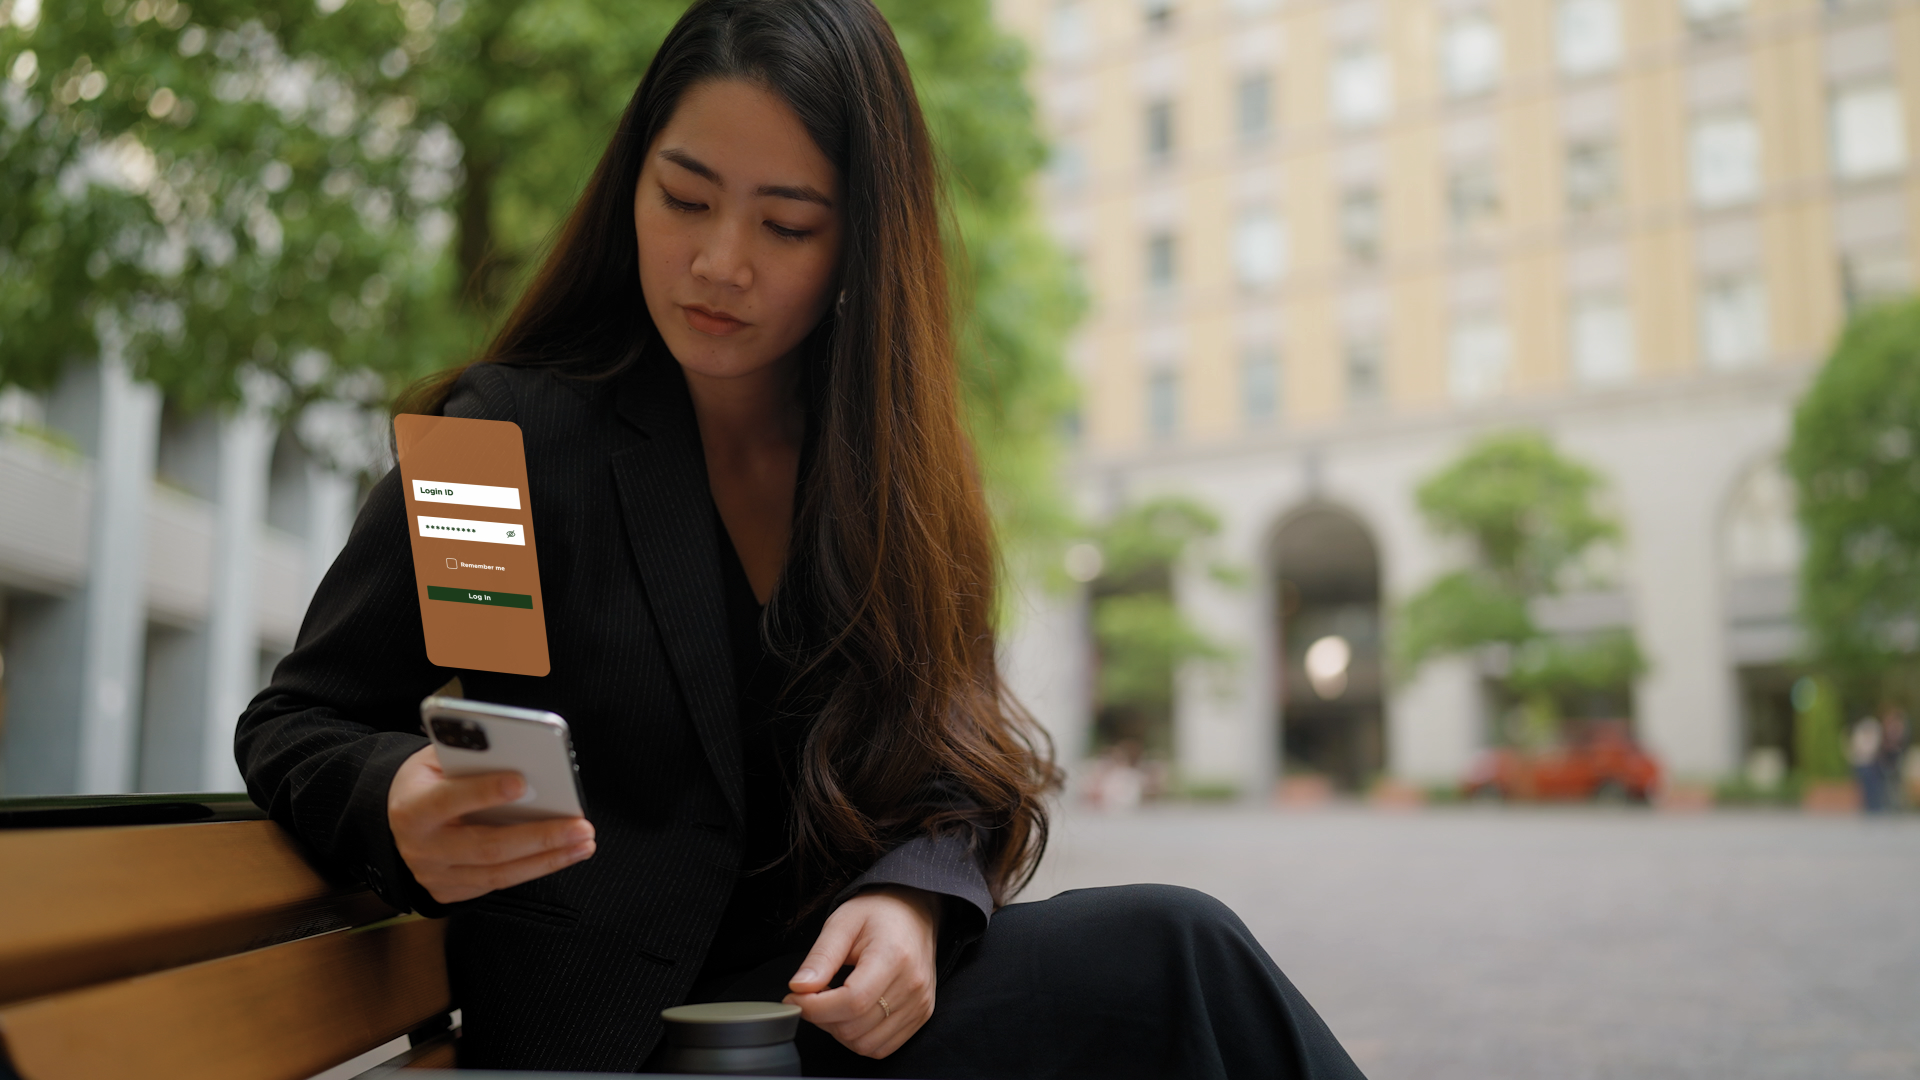 Woman sitting on a bench looking at bank account information on a cell phone